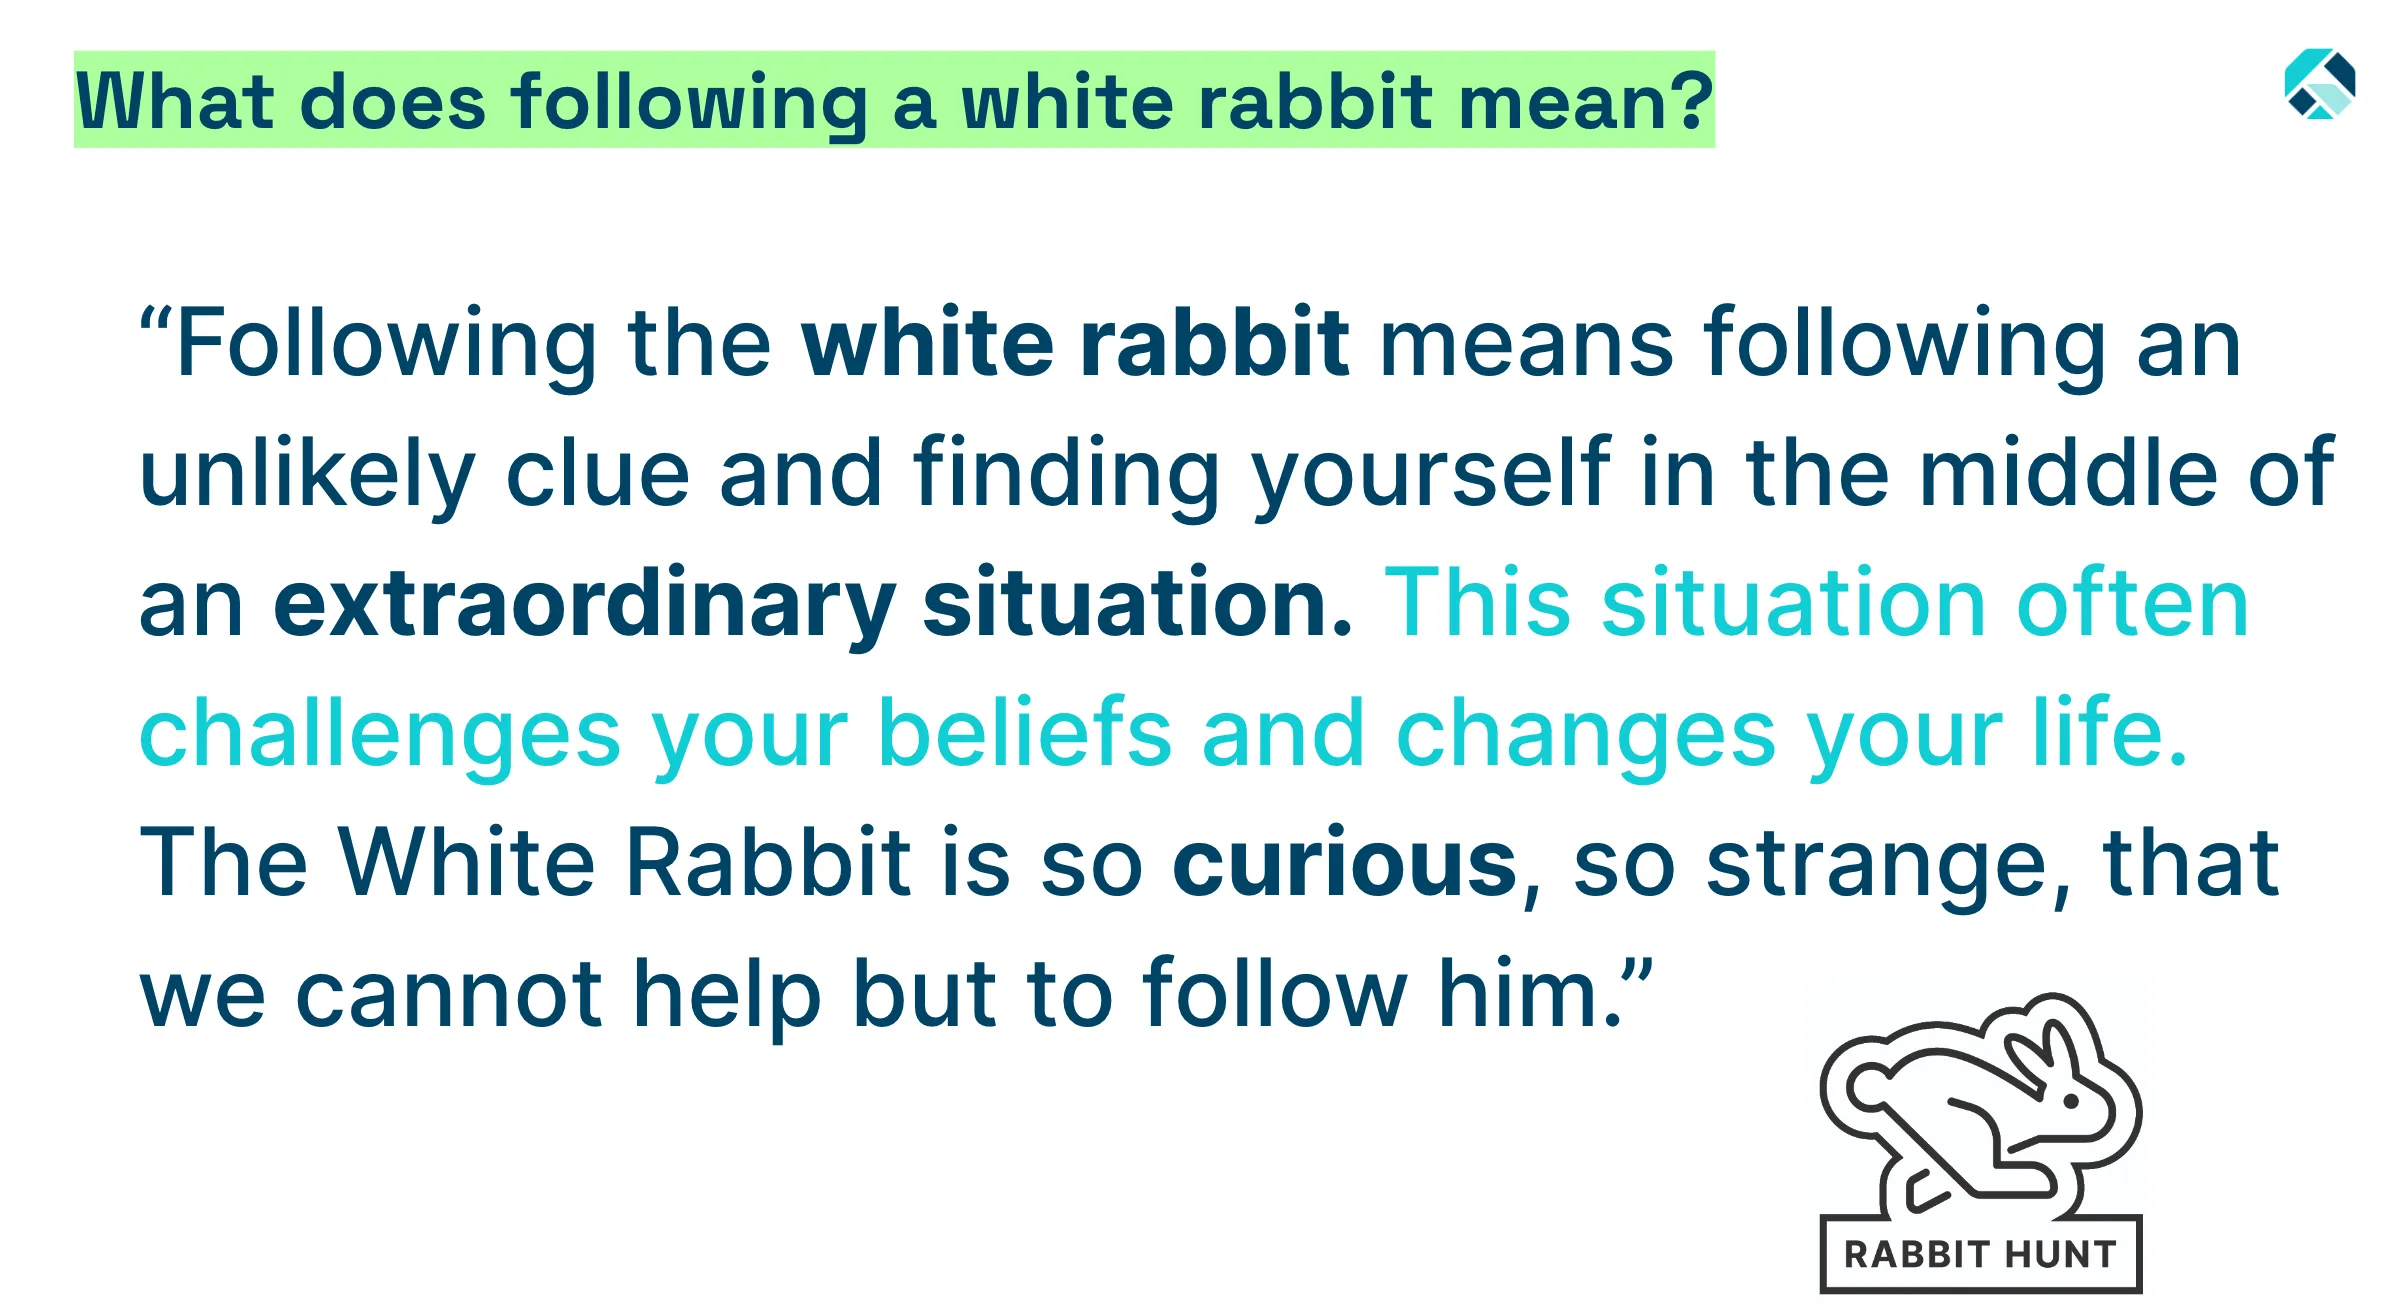 Meaning of rabbit hunt